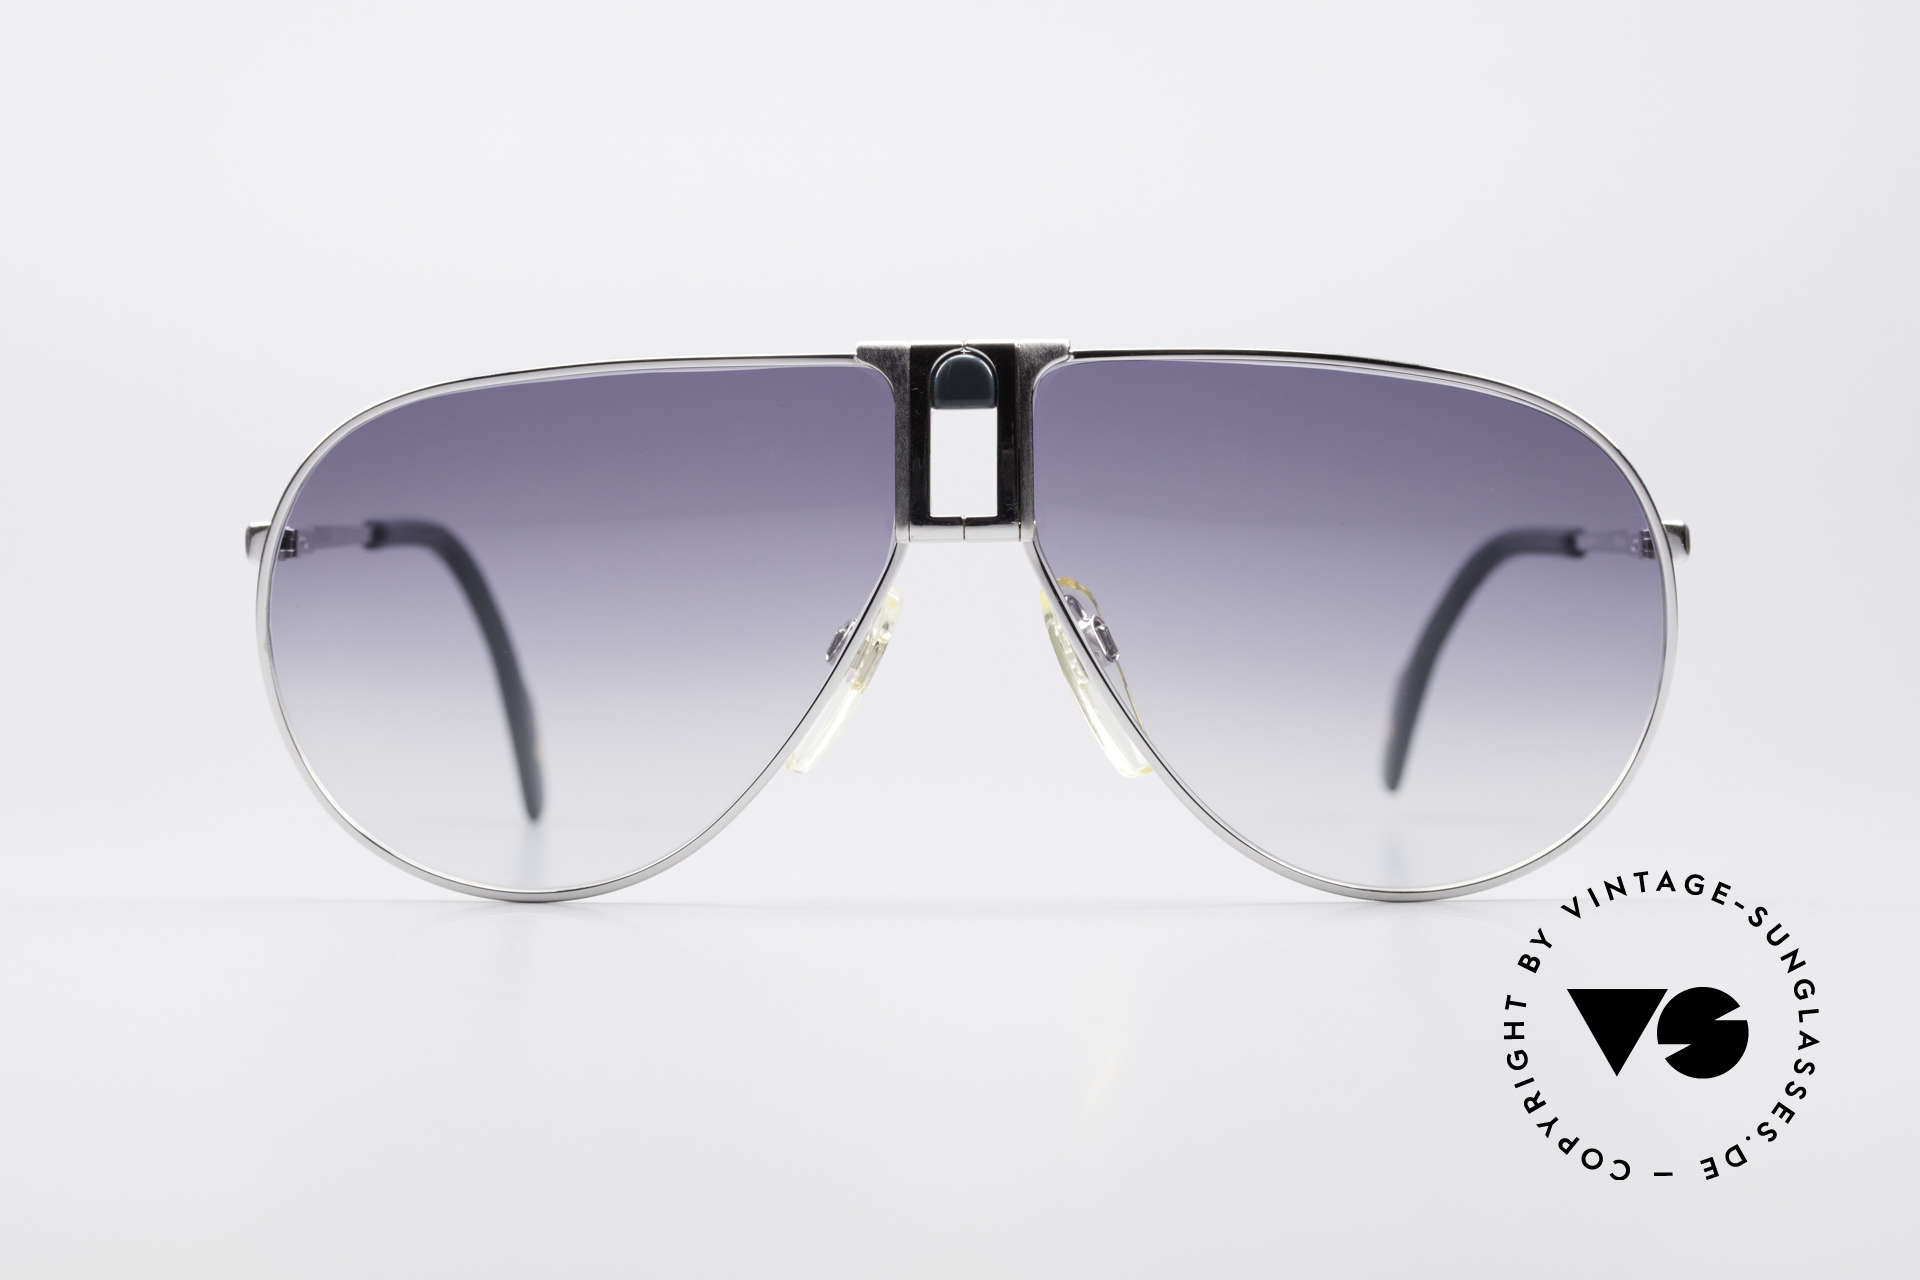 Longines 0154 Large 80's Aviator Sunglasses, precious frame with spring hinges (Metzler, Germany), Made for Men